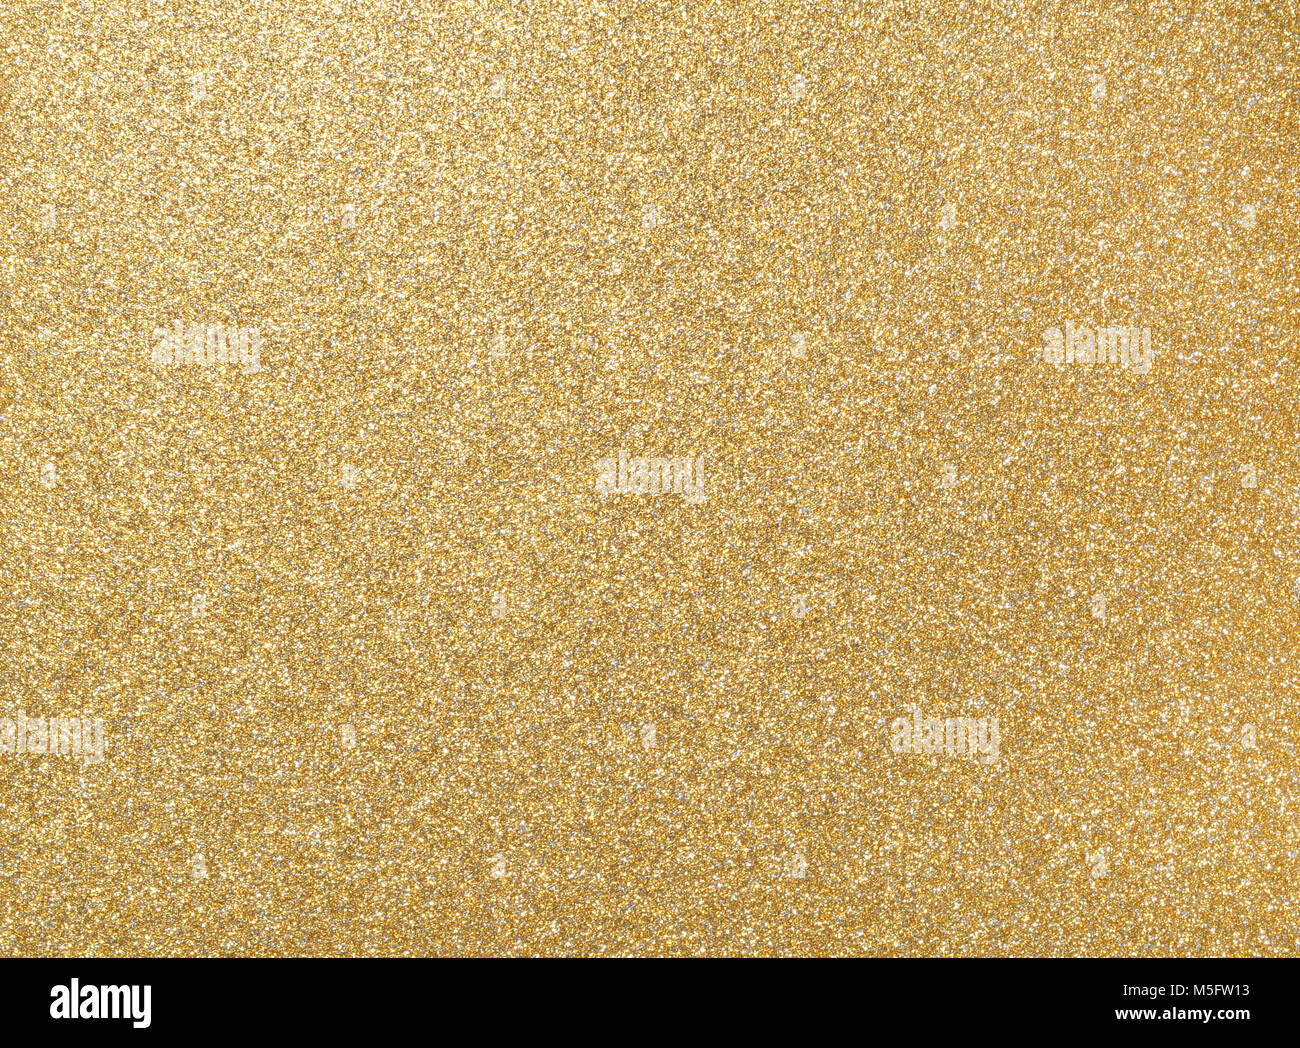 Glitter grain of gold on rough golden plate, closeup photo on rough golden plate surface show a detail of gold glister texture on gold plate, golden b Stock Photo